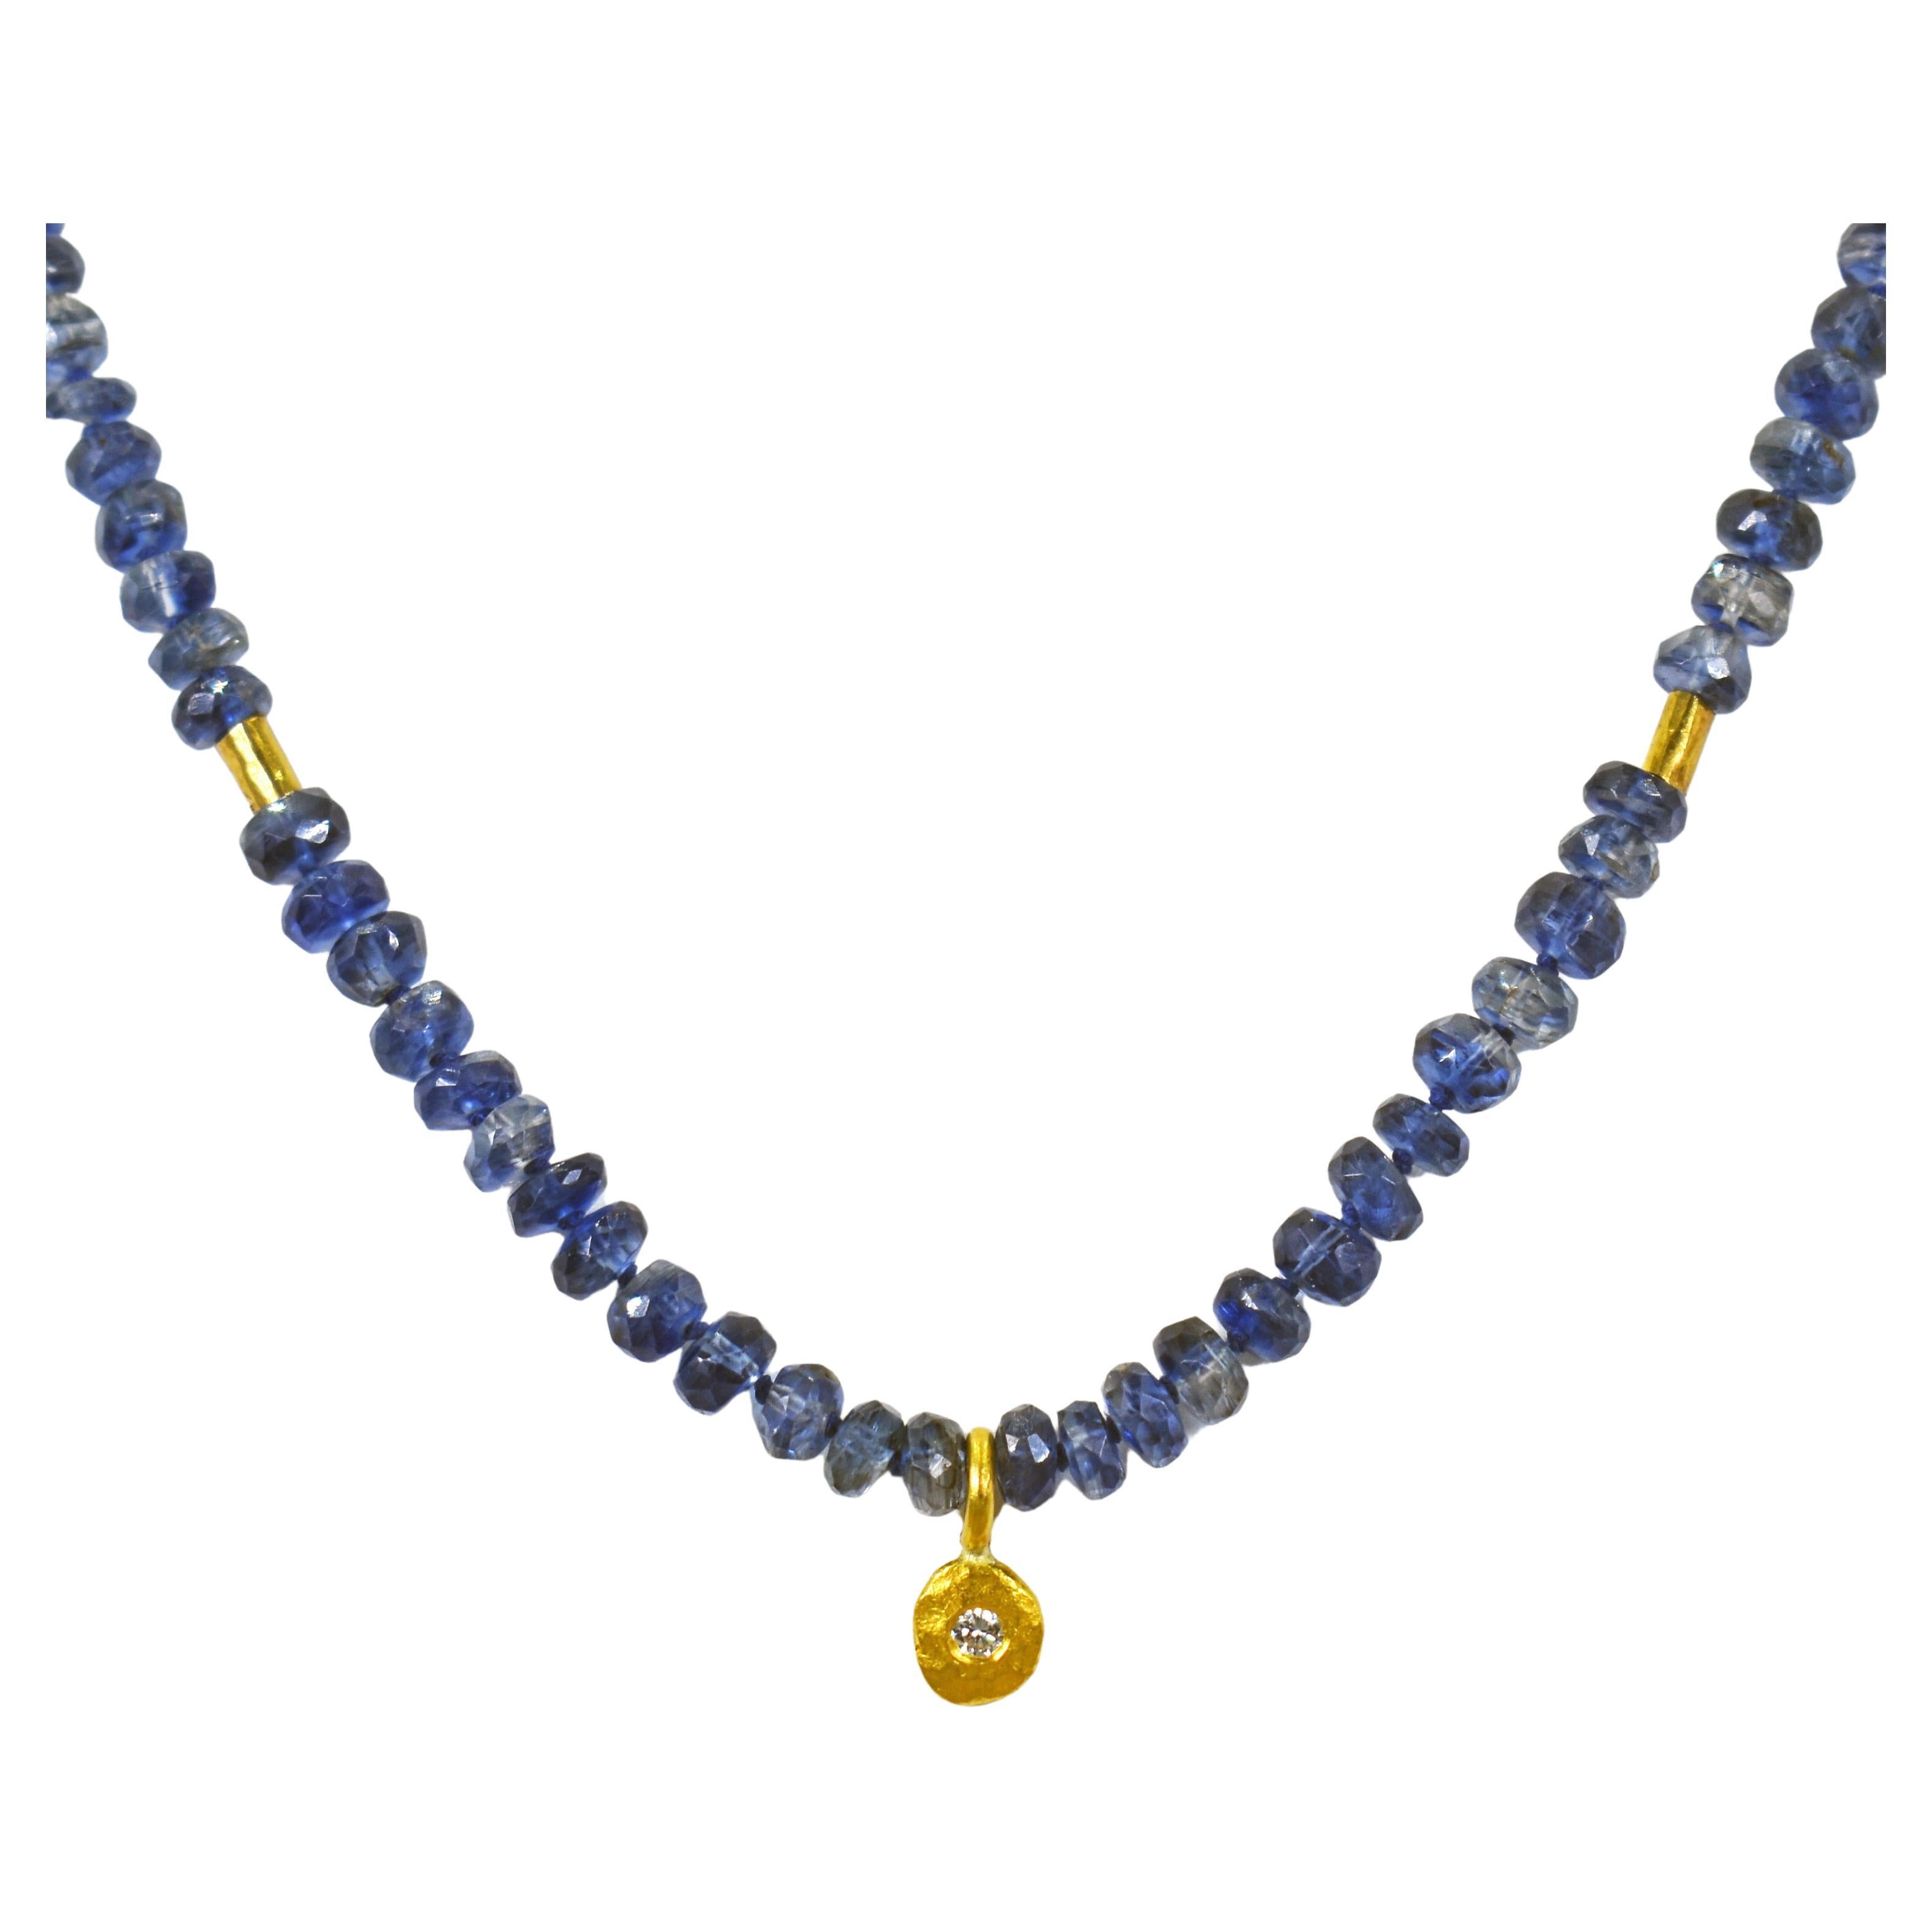 Faceted Kyanite & Diamond 22 Karat Gold Charm Beaded Necklace